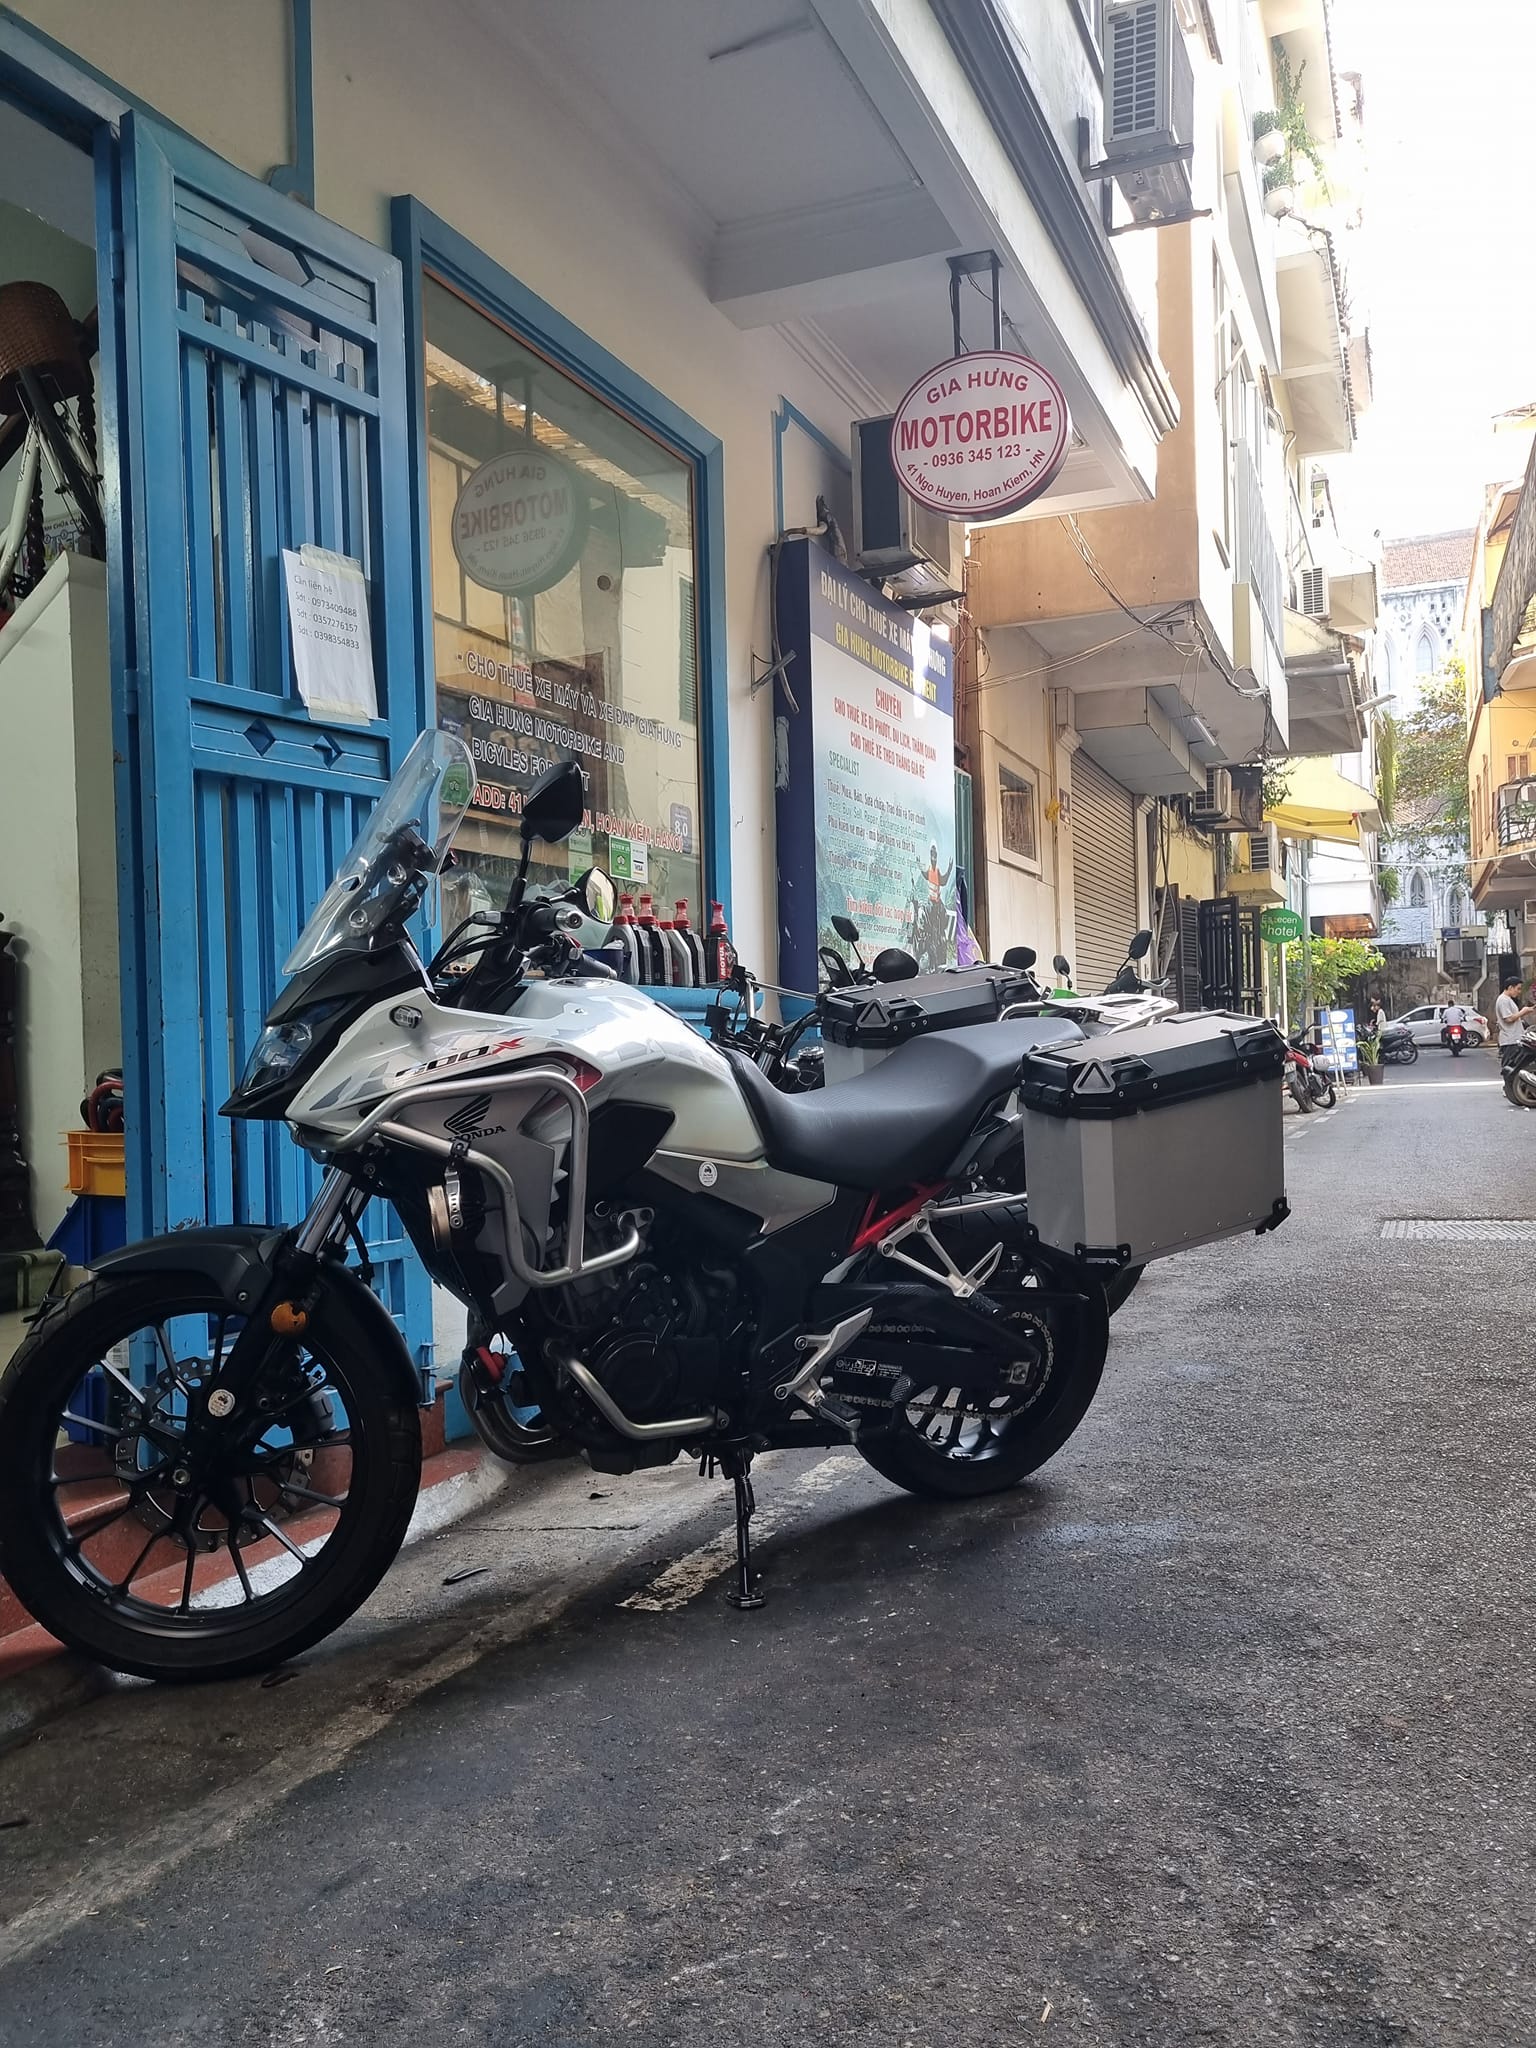 The Cost of Renting a Big Motorcycle in Hanoi